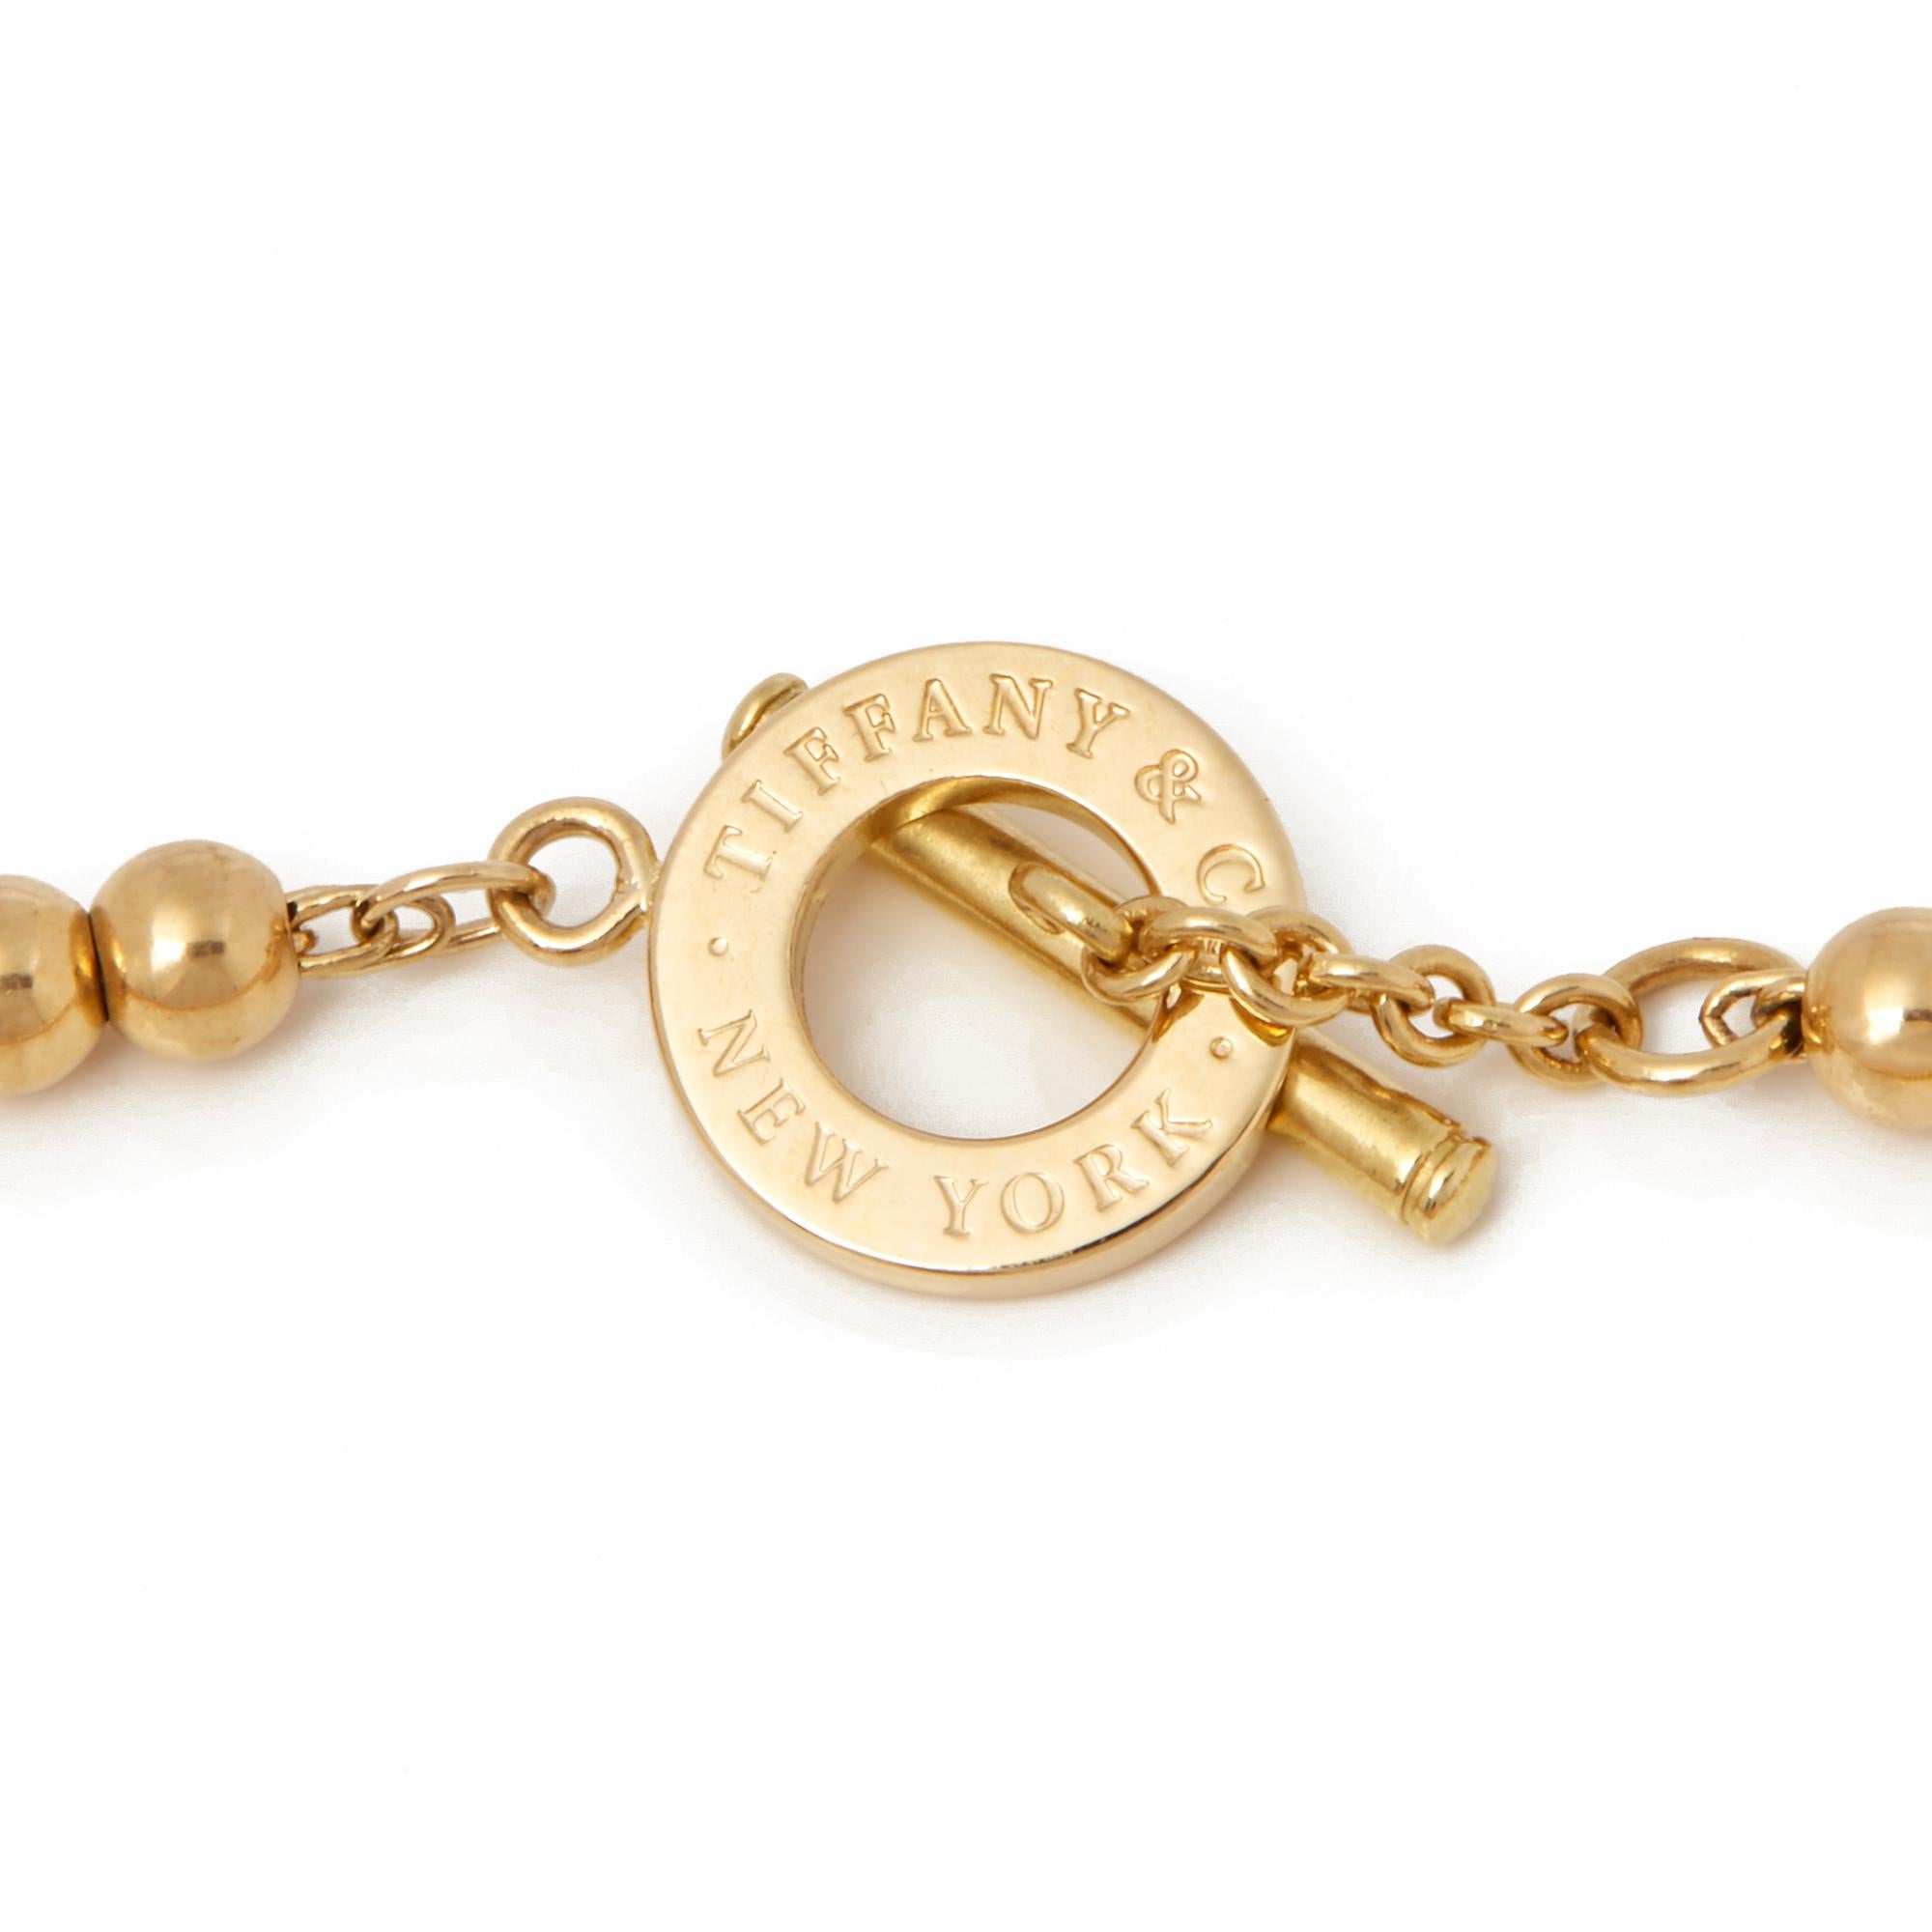 Code: COM2086
Brand: Tiffany & Co.
Description: 18k Yellow Gold Tiffany Beads Toggle Bracelet
Accompanied With: Box & Papers
Gender: Ladies
Bracelet Length: 19cm
Bracelet Width: 3mm
Clasp Type: Toggle
Condition: 9
Material: Yellow Gold
Total Weight: